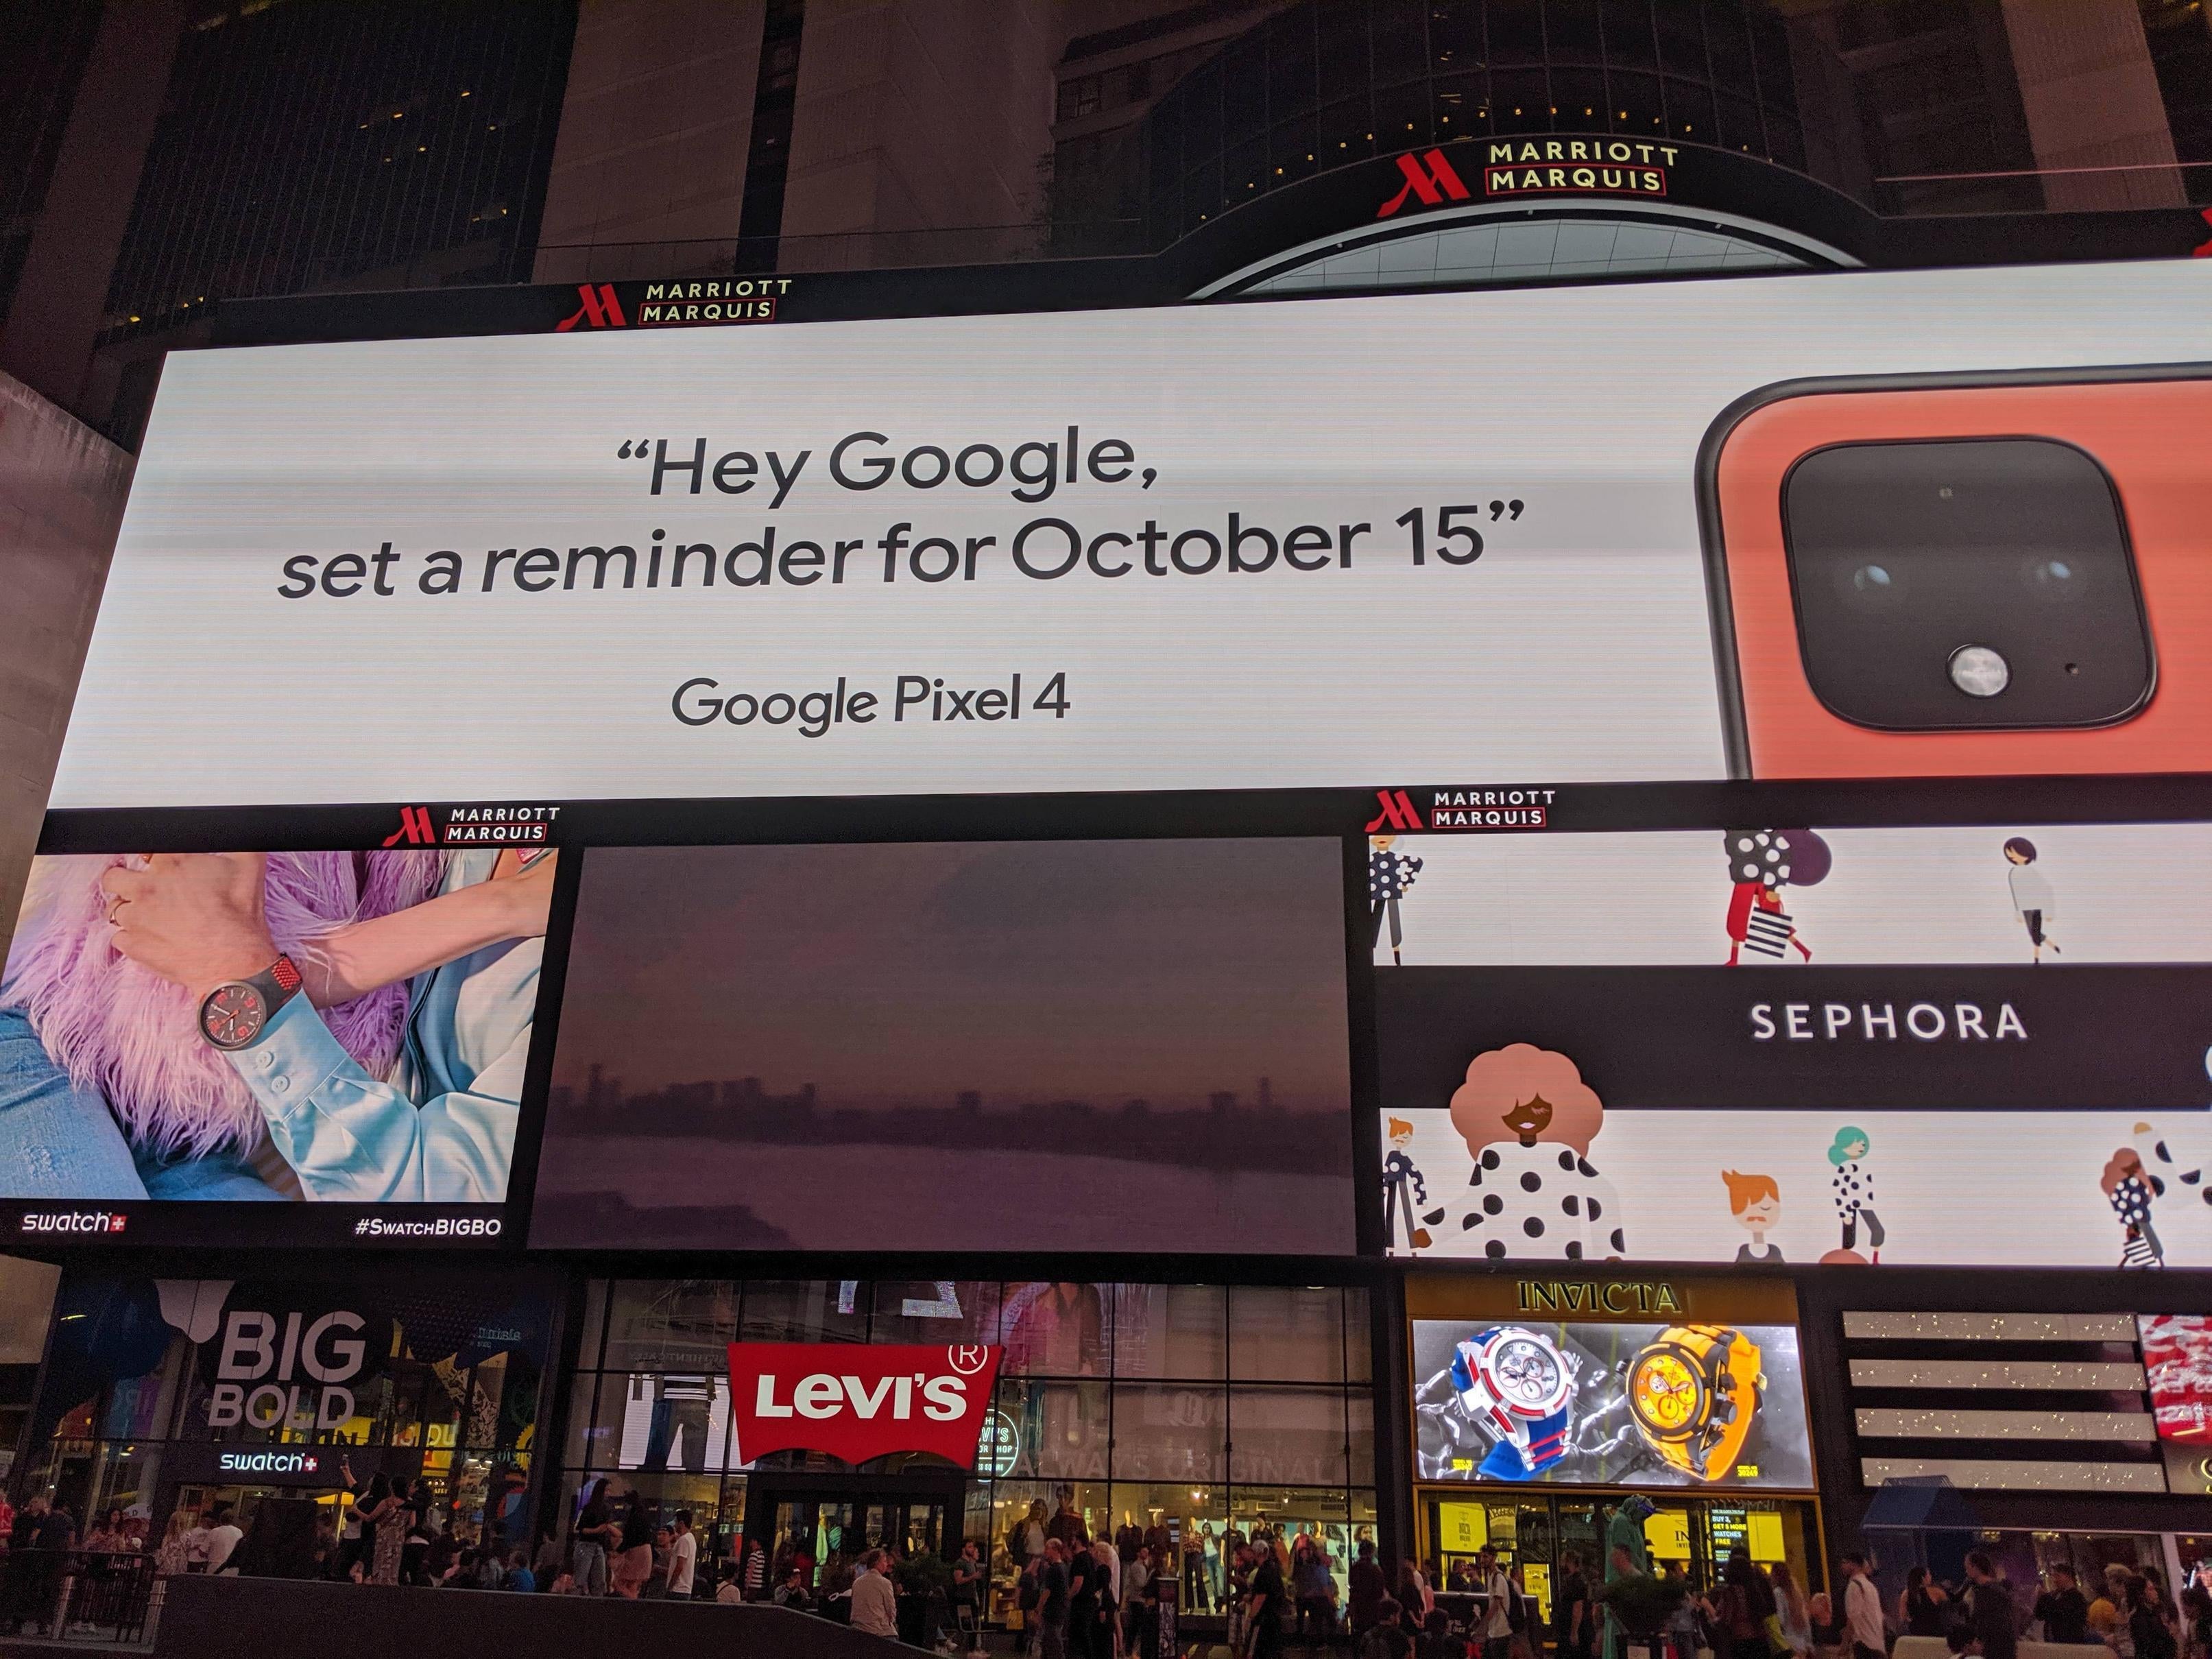 Google lights up Times Square with a teaser for the Pixel 4 - Times Square teaser confirms Coral/Orange Google Pixel 4